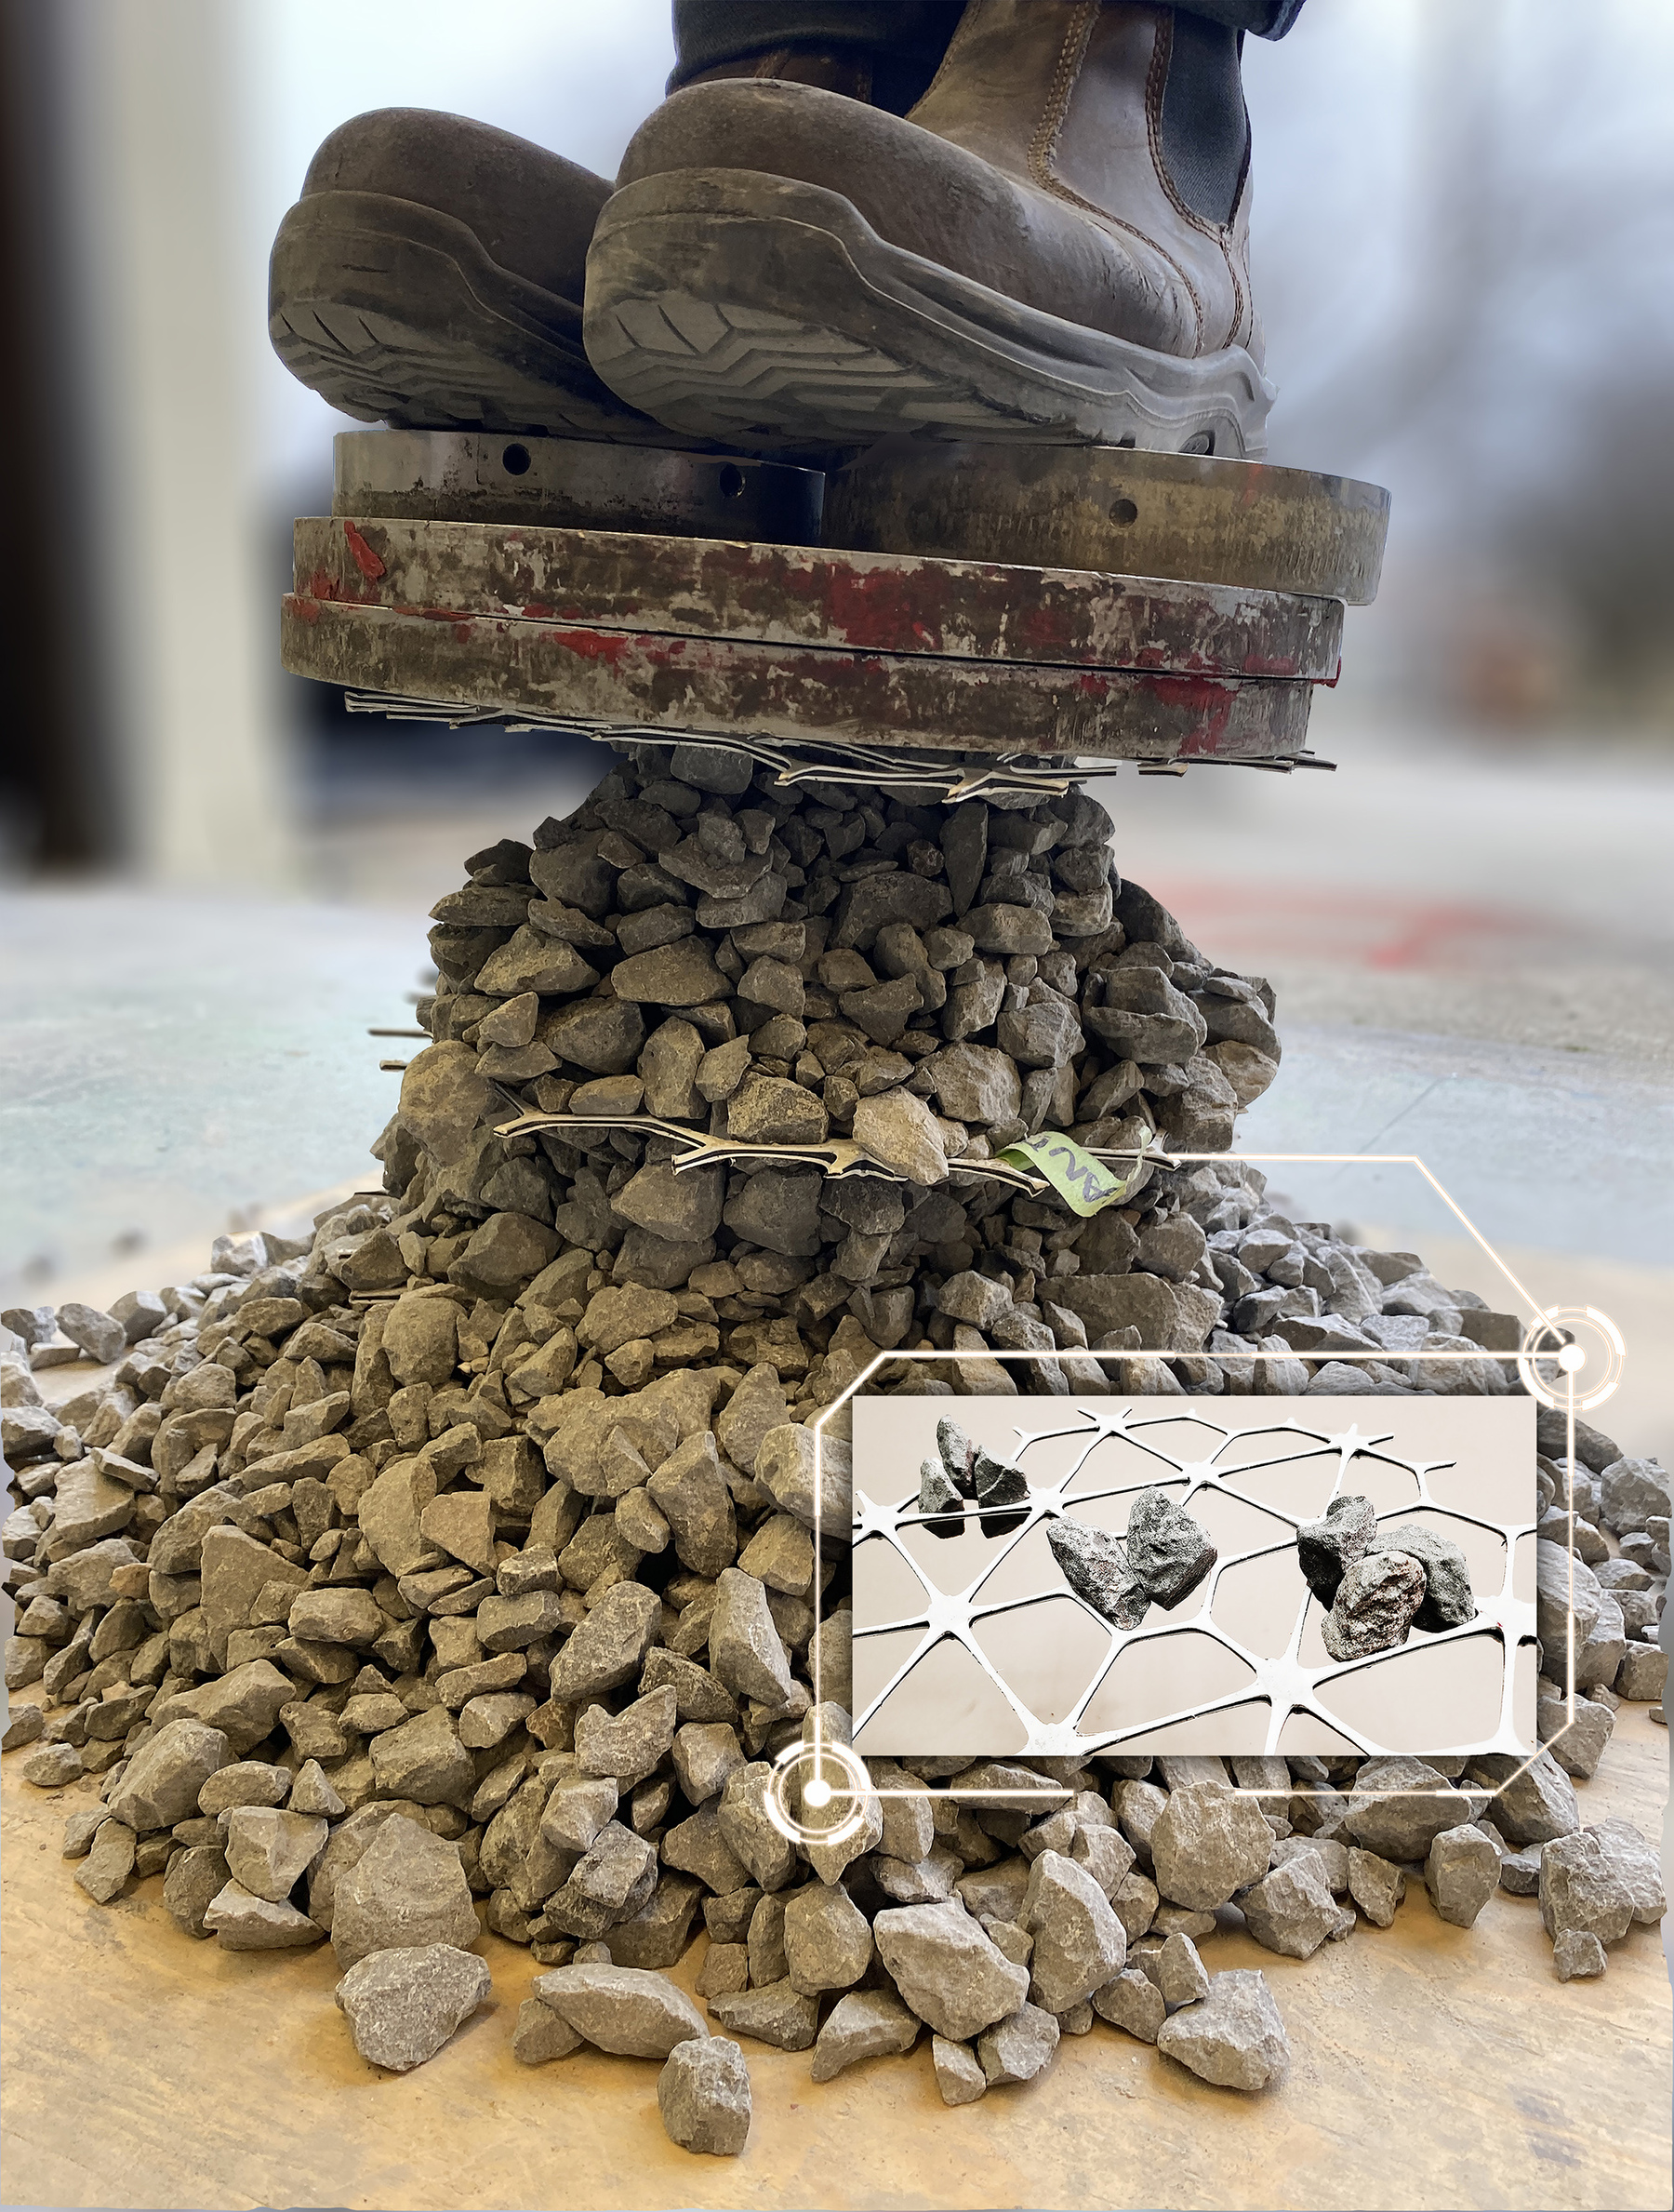 Two feet stand on top of a thin pile of loose rocks. A small layer of webbing can be seen in the pile.